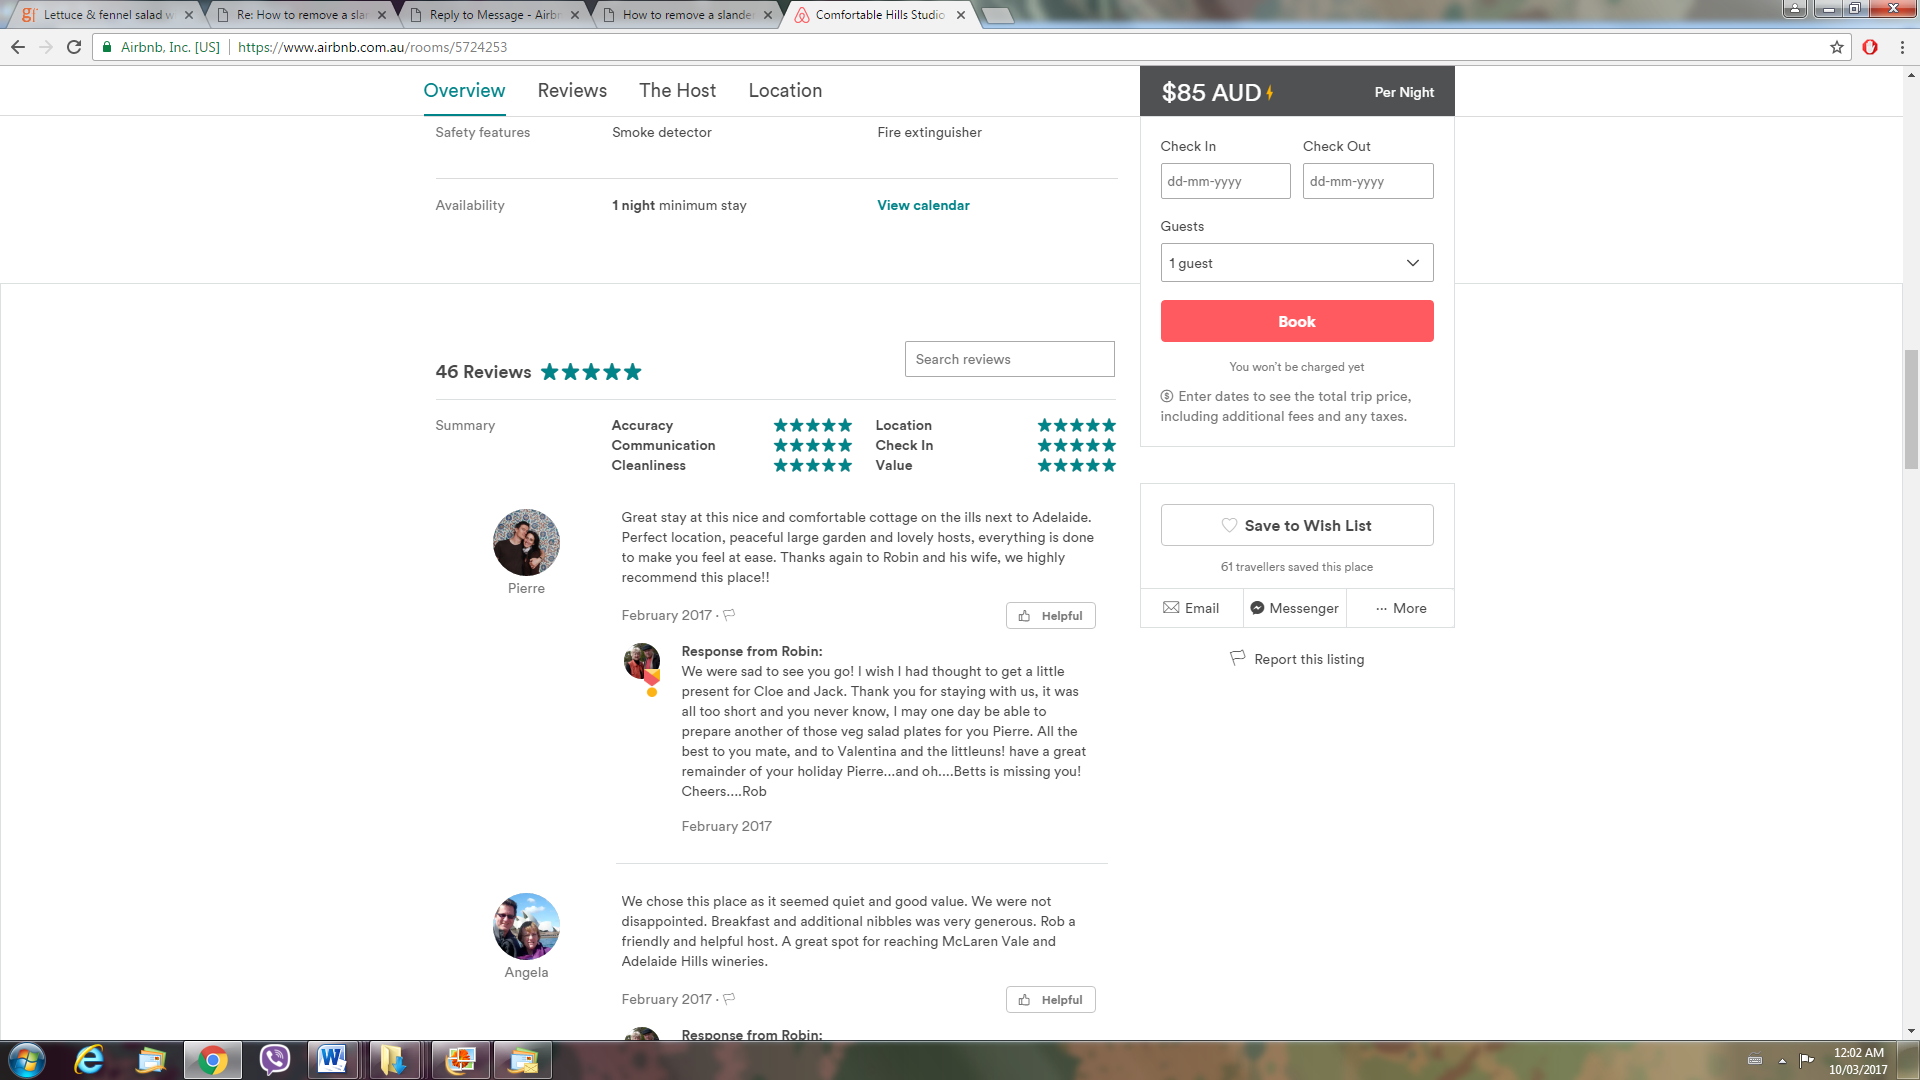 How to remove a slanderous review - Airbnb Community